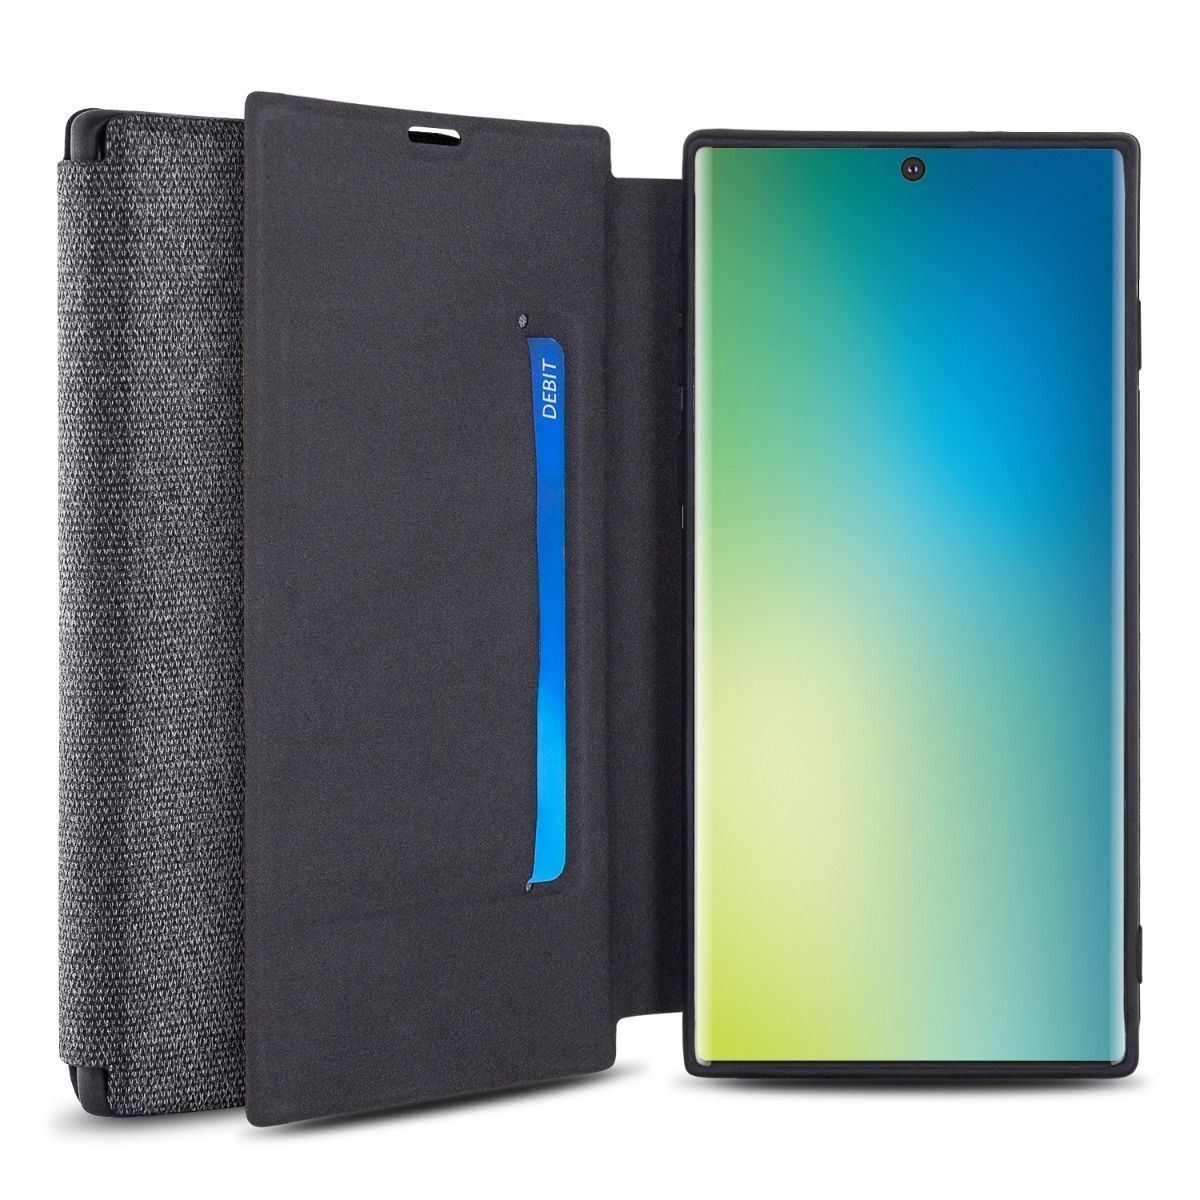 The best cases for Samsung Galaxy Note 10 and Note 10+: protect your shiny new jewel!